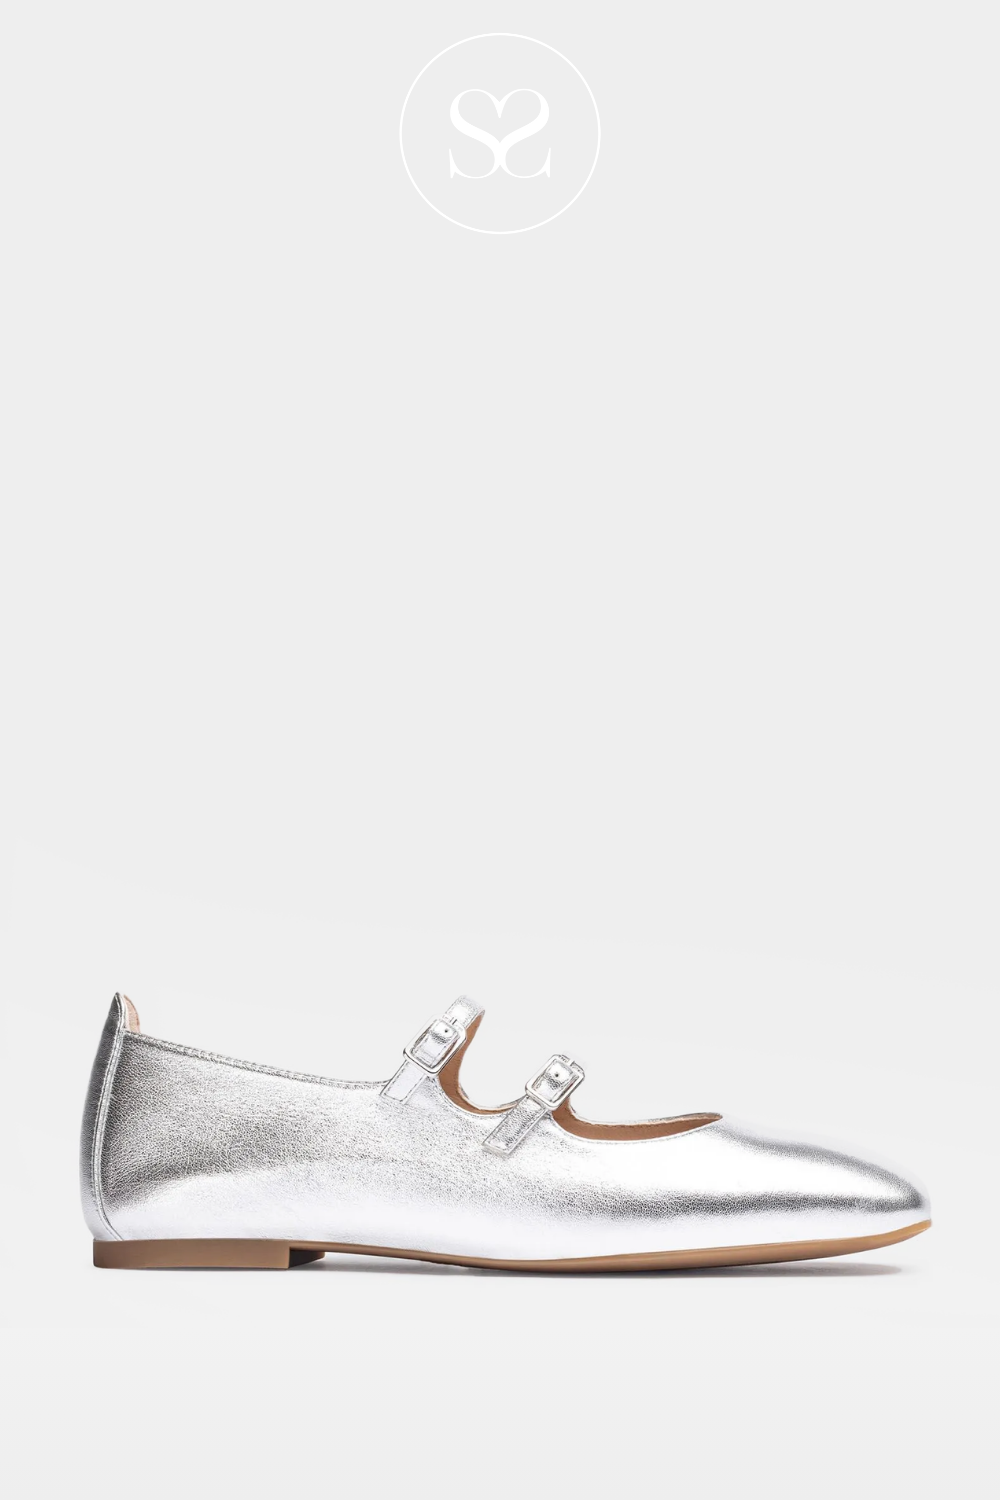 UNISA BERLEY SILVER LEATHER DOUBLE STRAPPED PUMPS